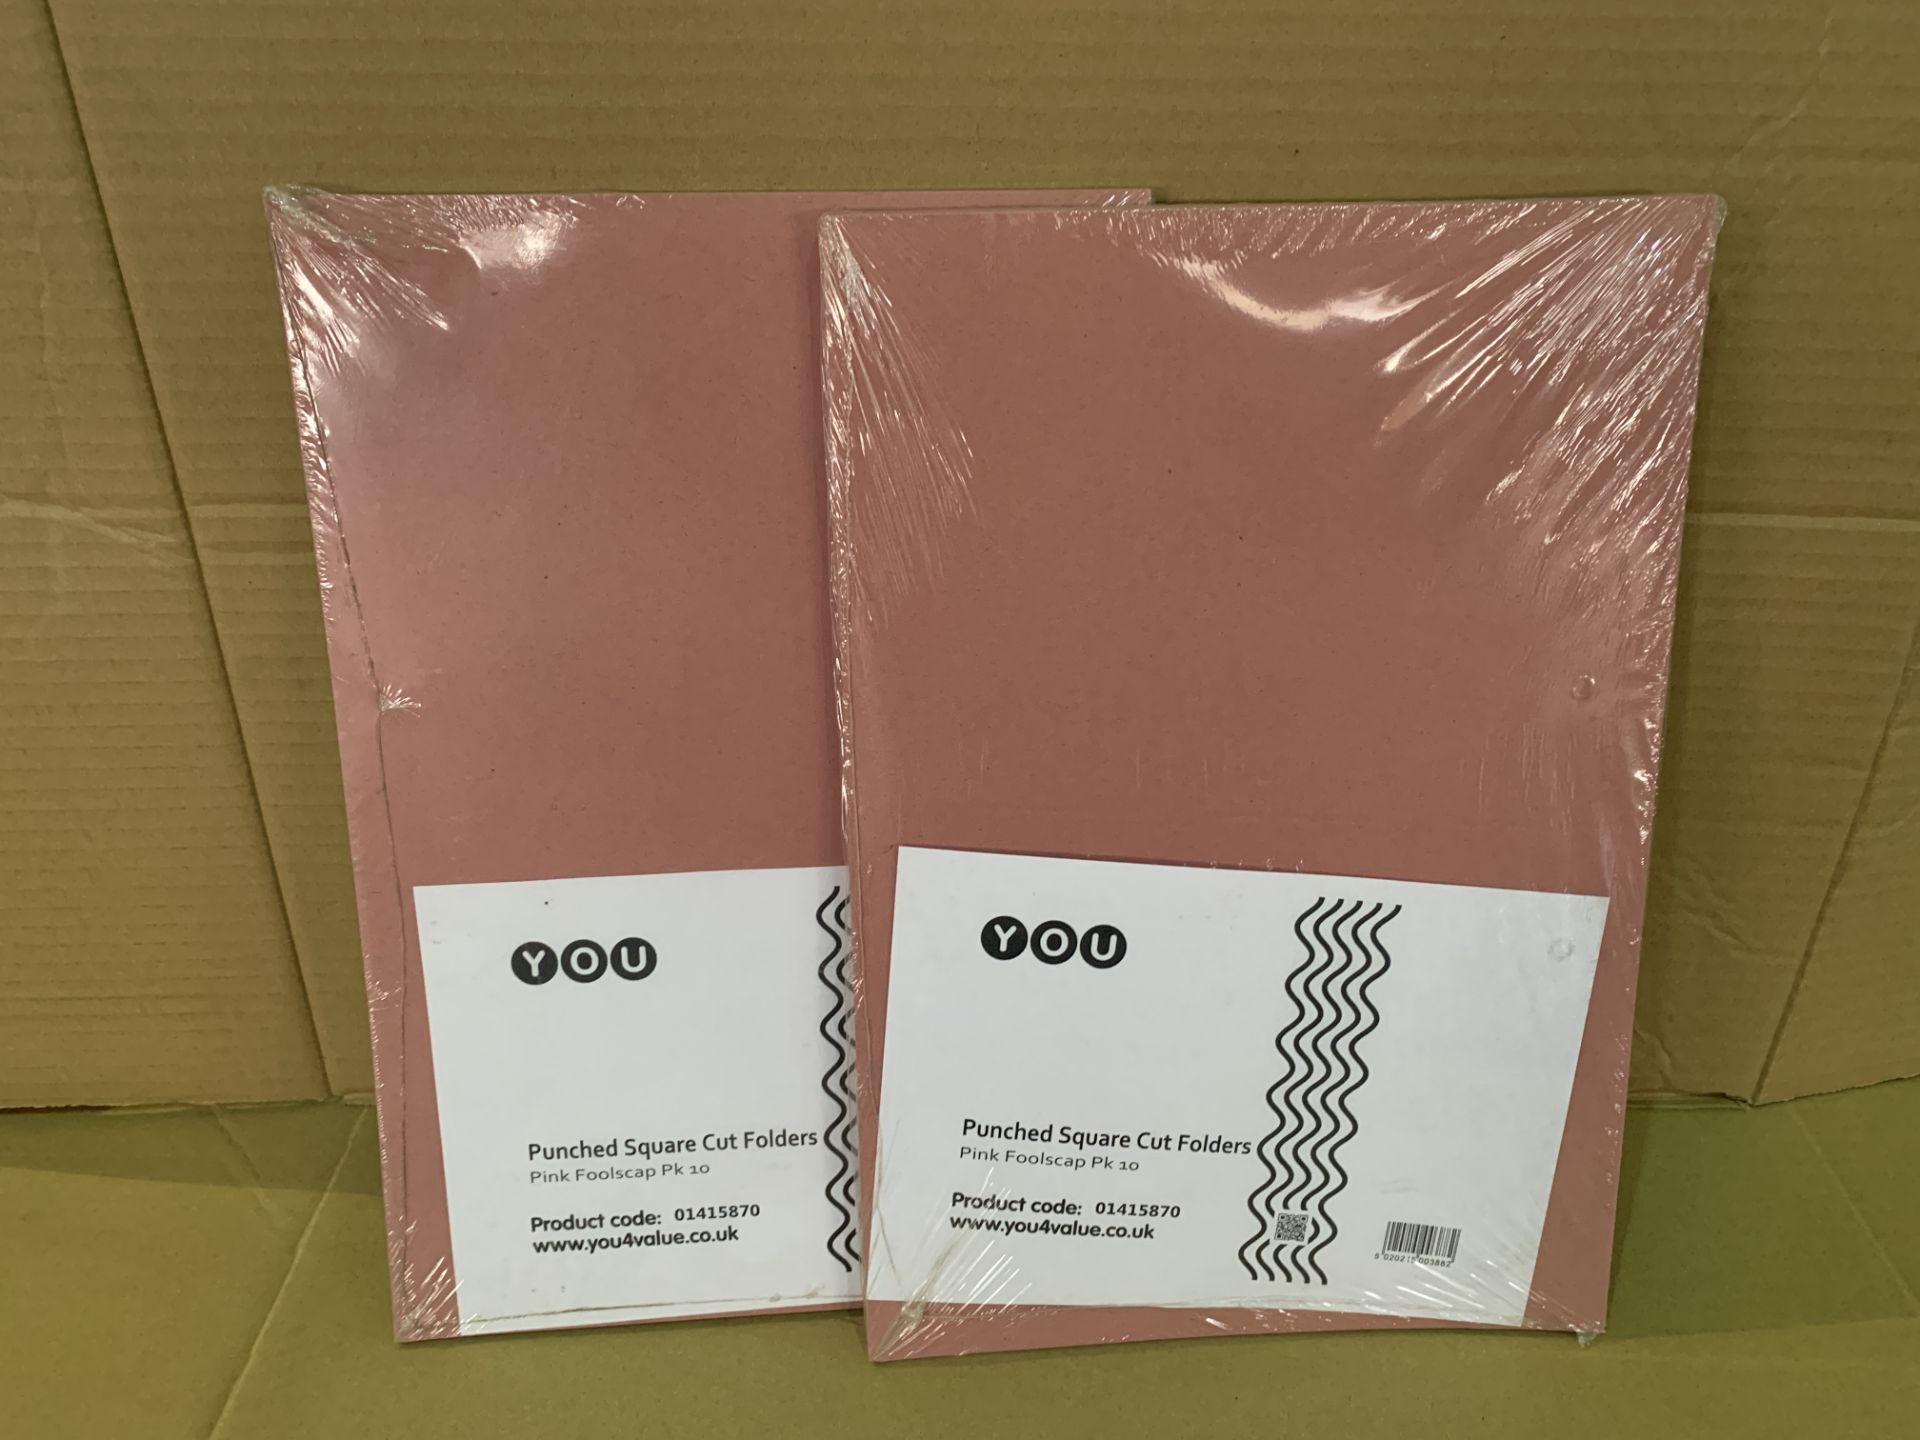 80 X BRAND NEW PACKS OF 10 PUNCHED SQUARE CUT FOLDERS R15